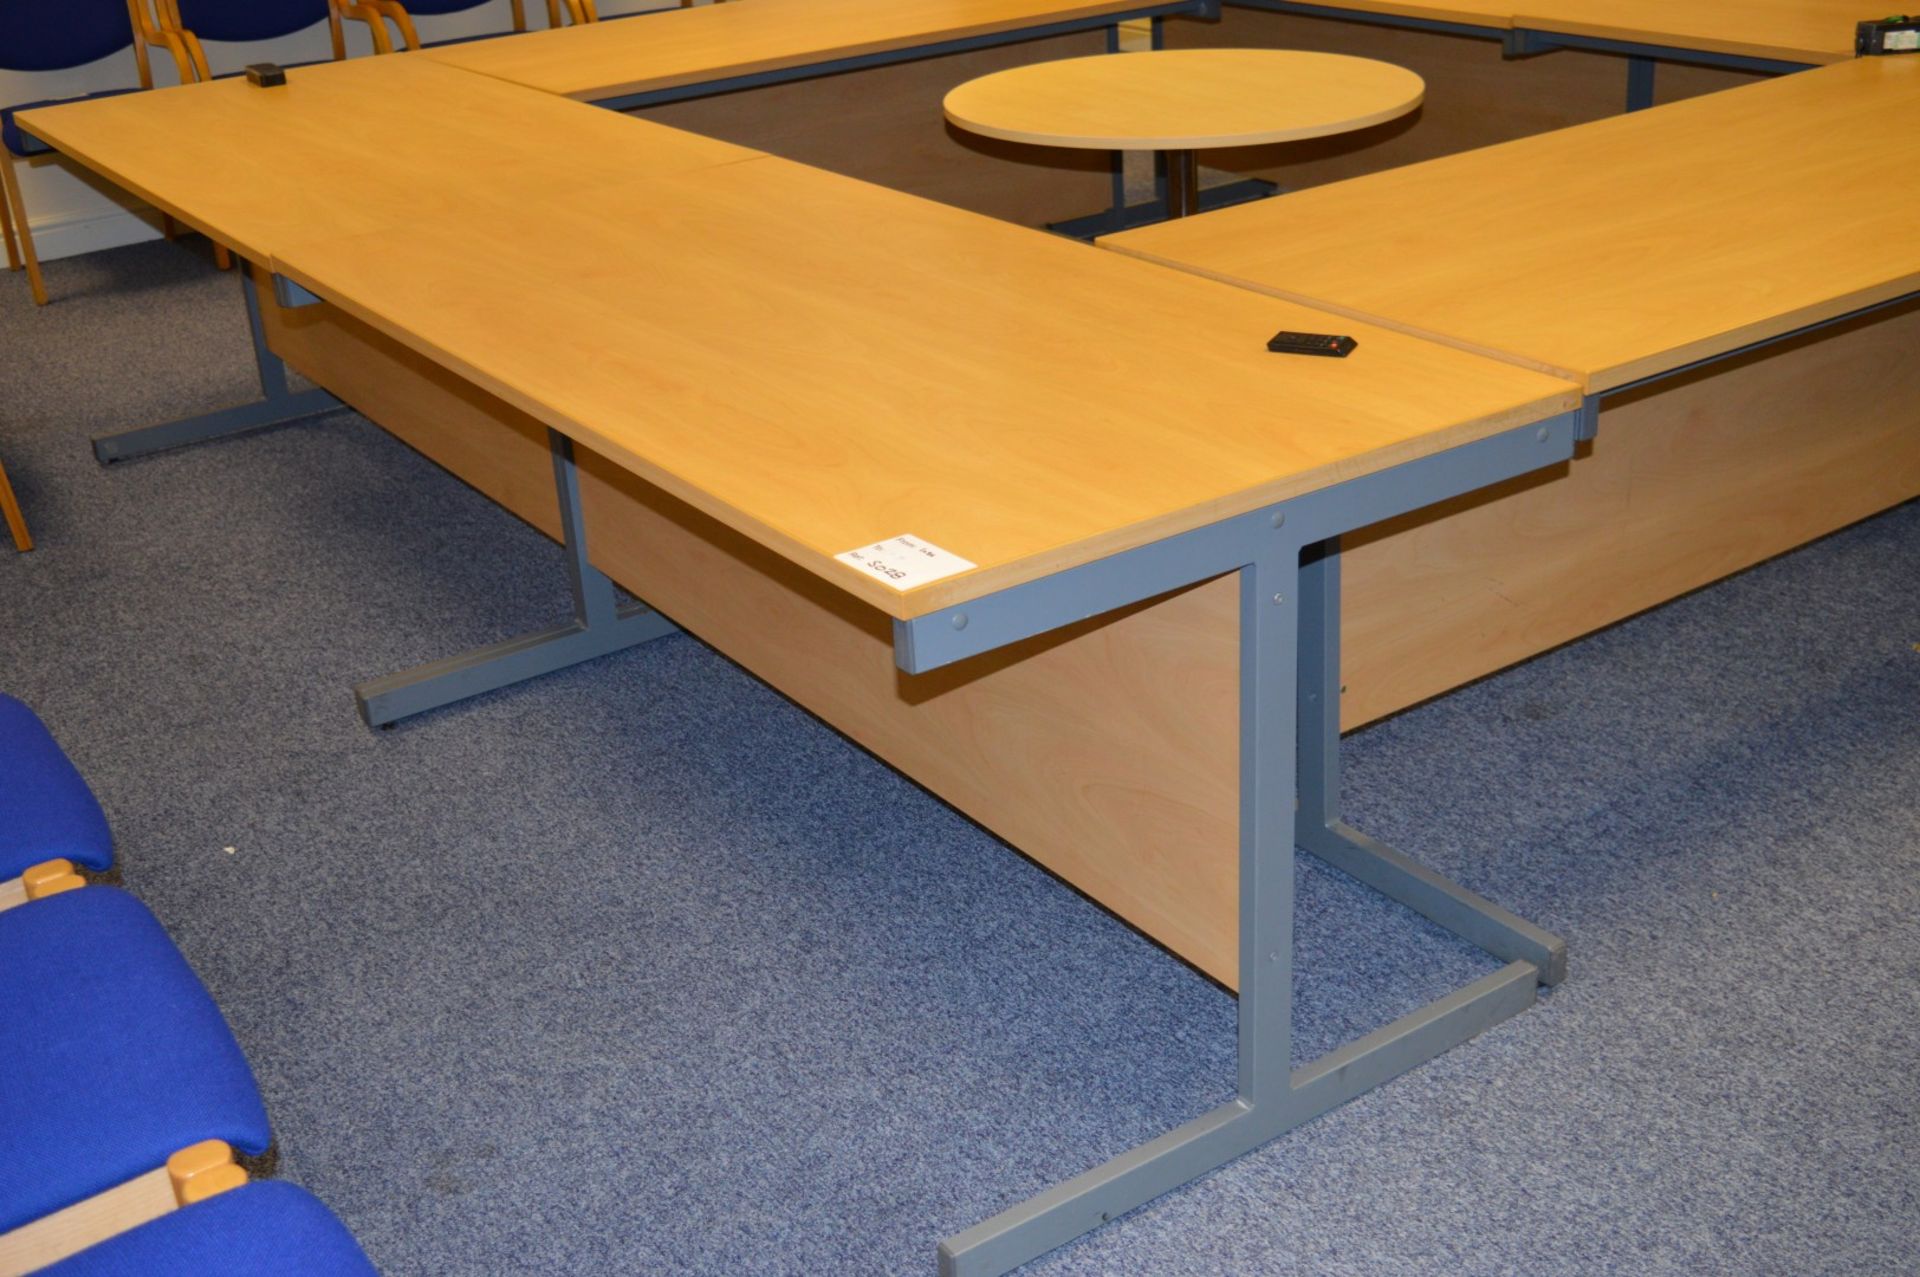 6 x Large Office Desks Plus Small Circular Meeting Table - H73 x W160 x D80 cms - Premium Quality - Image 2 of 5